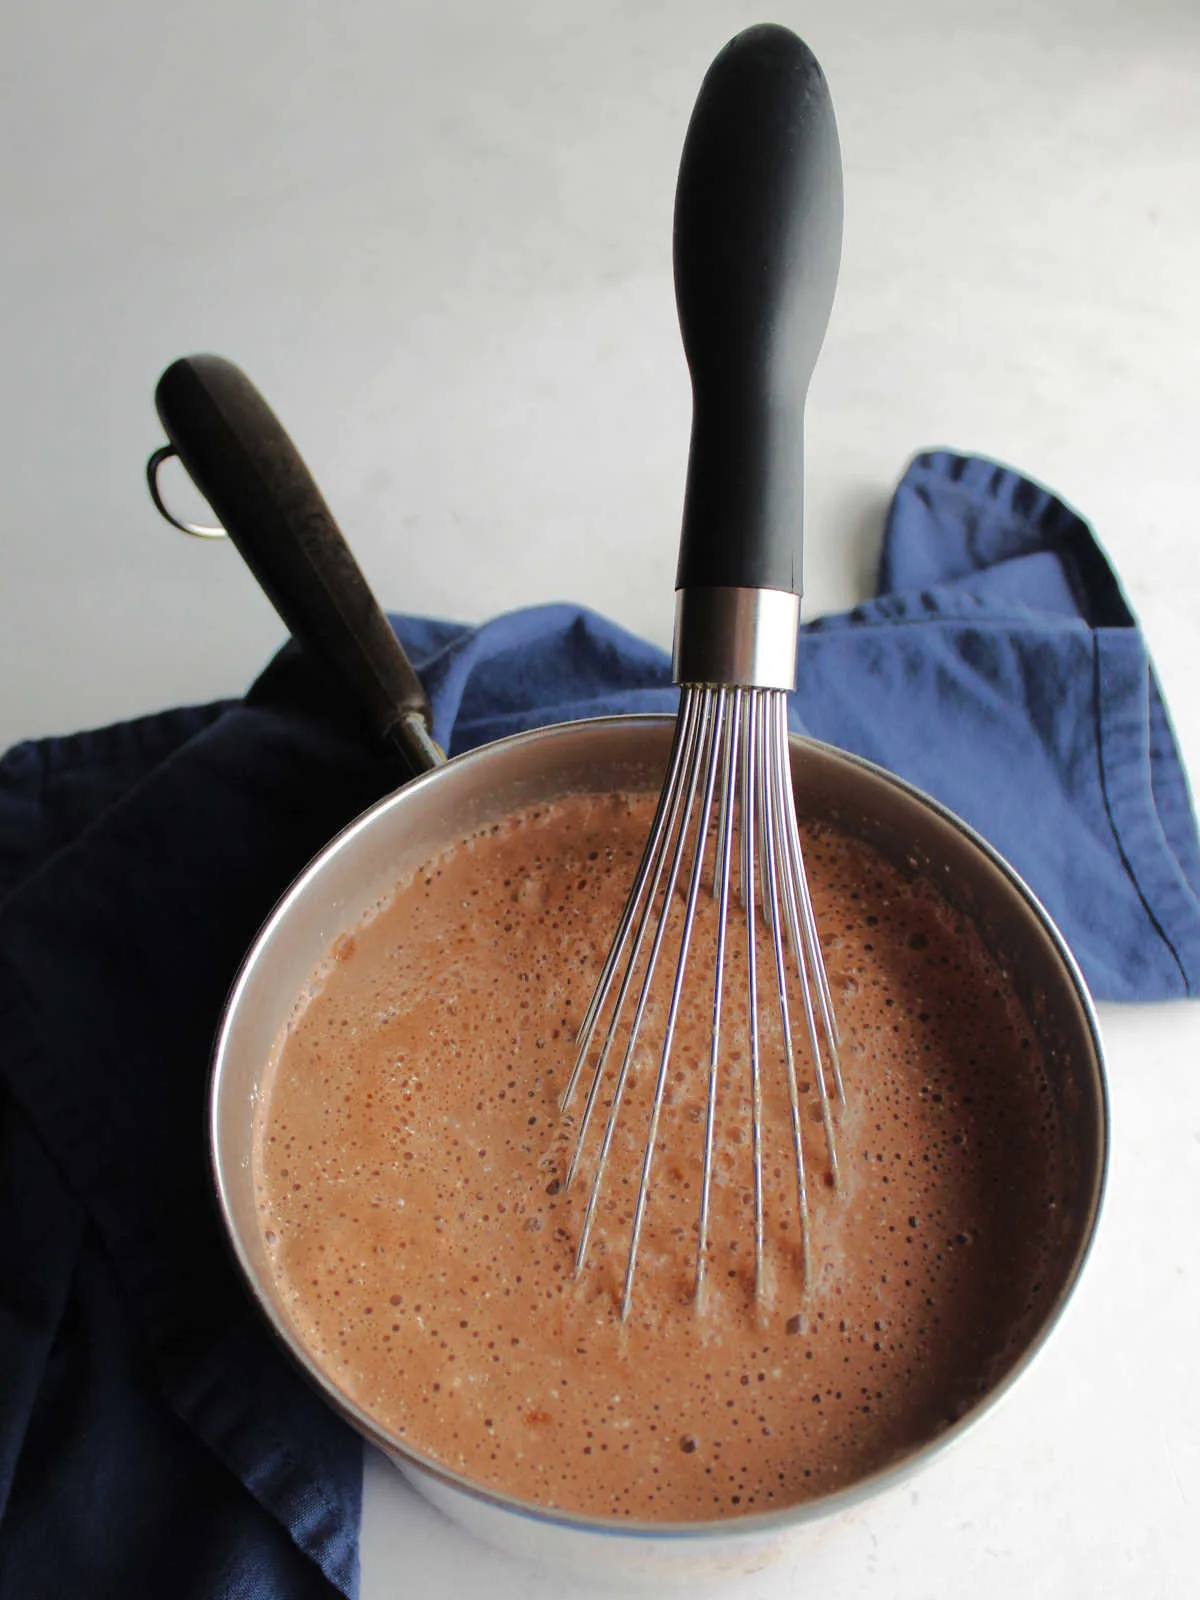 Milk and water whisked into the hot chocolate mix in saucepan.